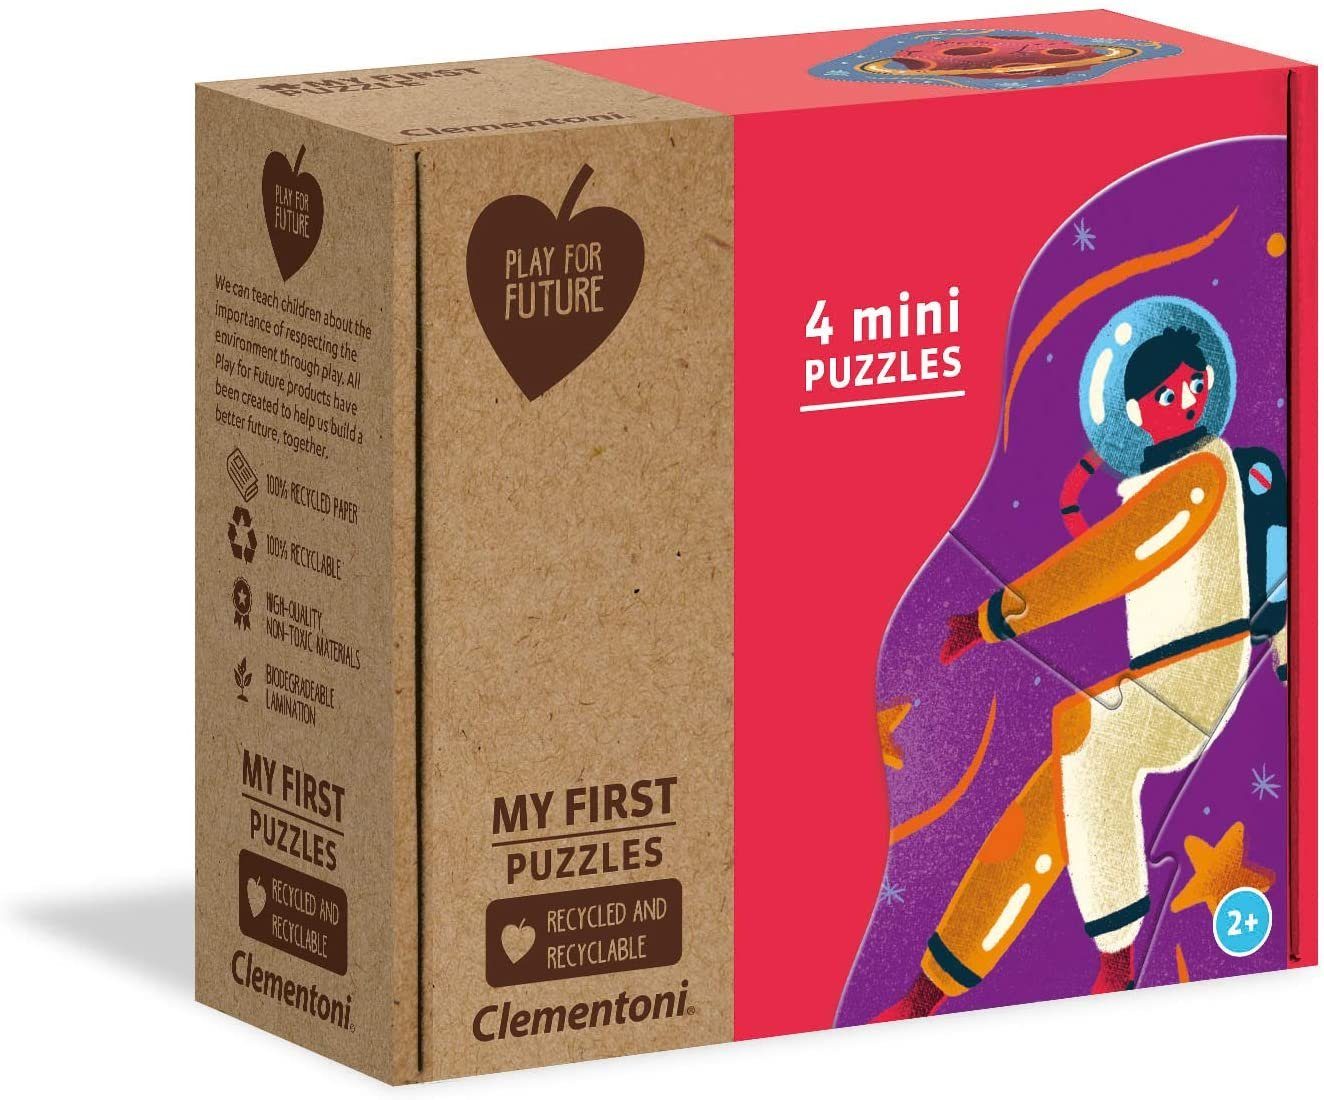 Clementoni® Puzzle Play 14 Future 6, for Puzzleteile (3, Mini-Puzzle Moon 12 Teile), The 4 9, Over